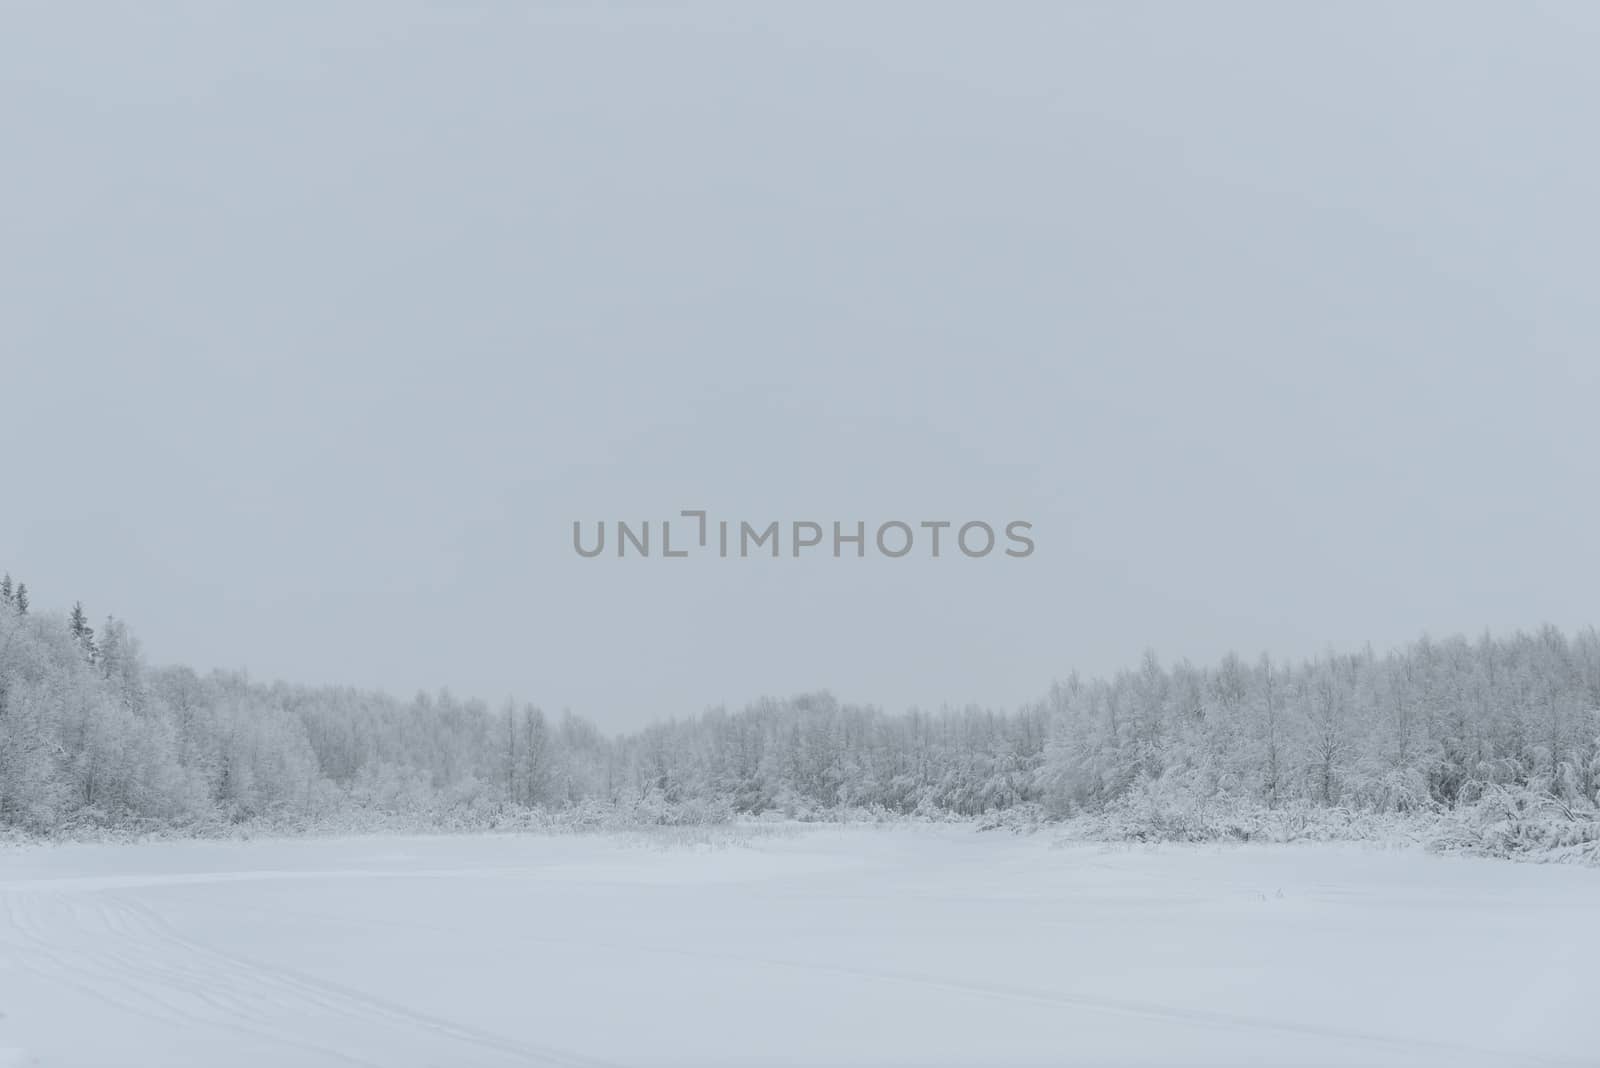 The ice lake and forest has covered with heavy snow and bad weather sky in winter season at Holiday Village Kuukiuru, Finland.